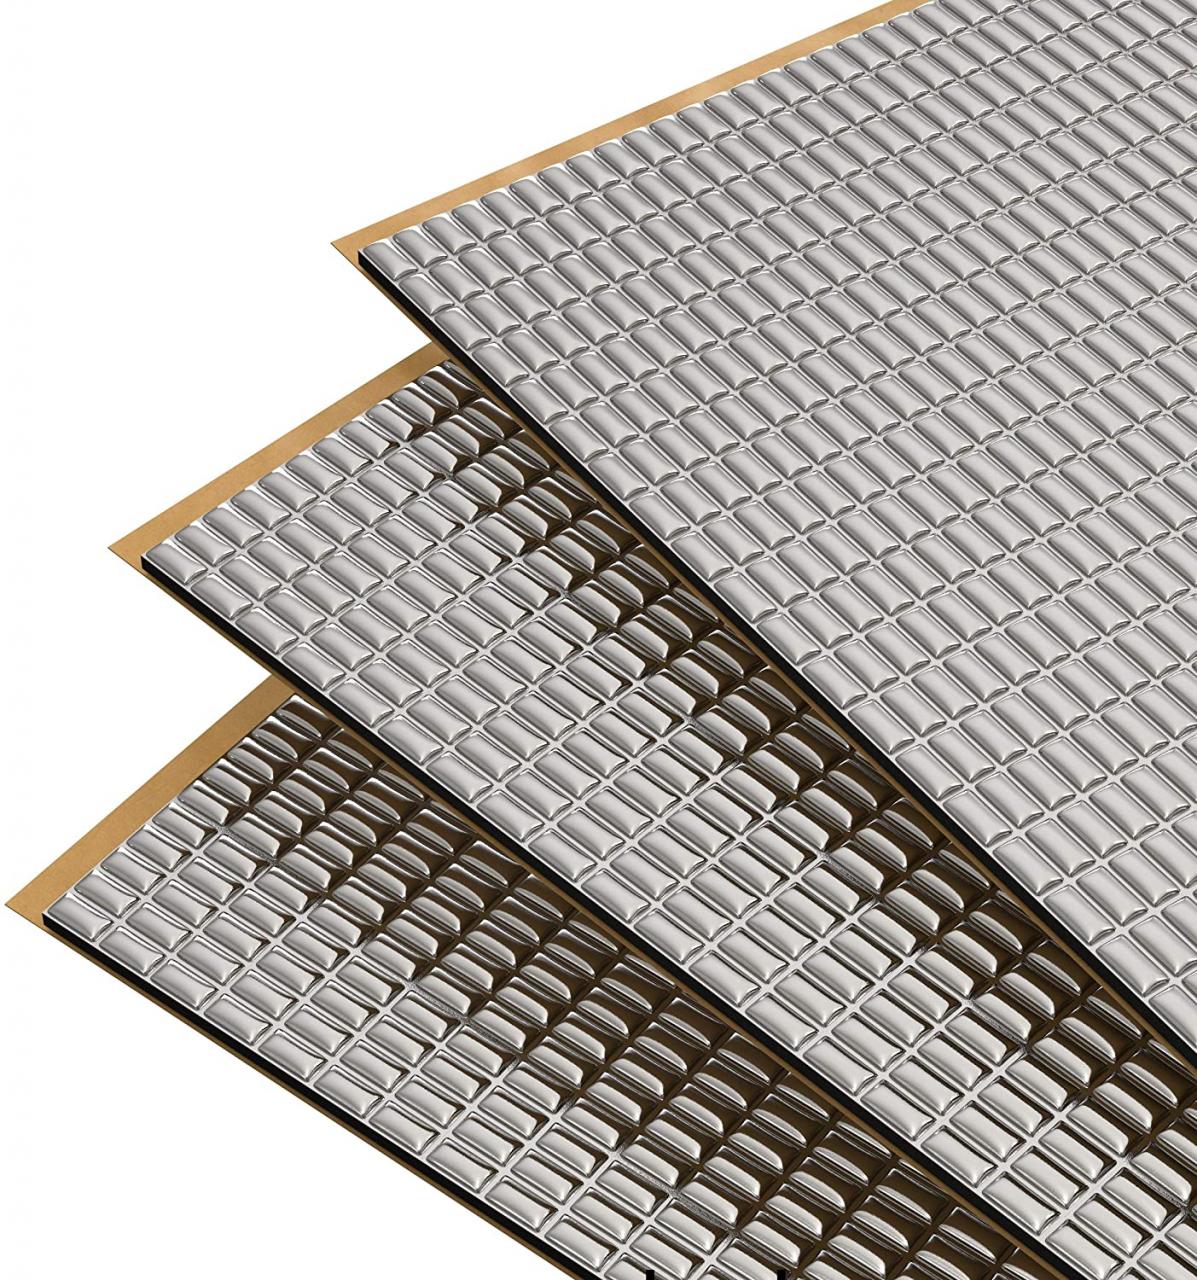 Best Automotive Sound Deadening Insulation (Review & Buying Guide) in 2020